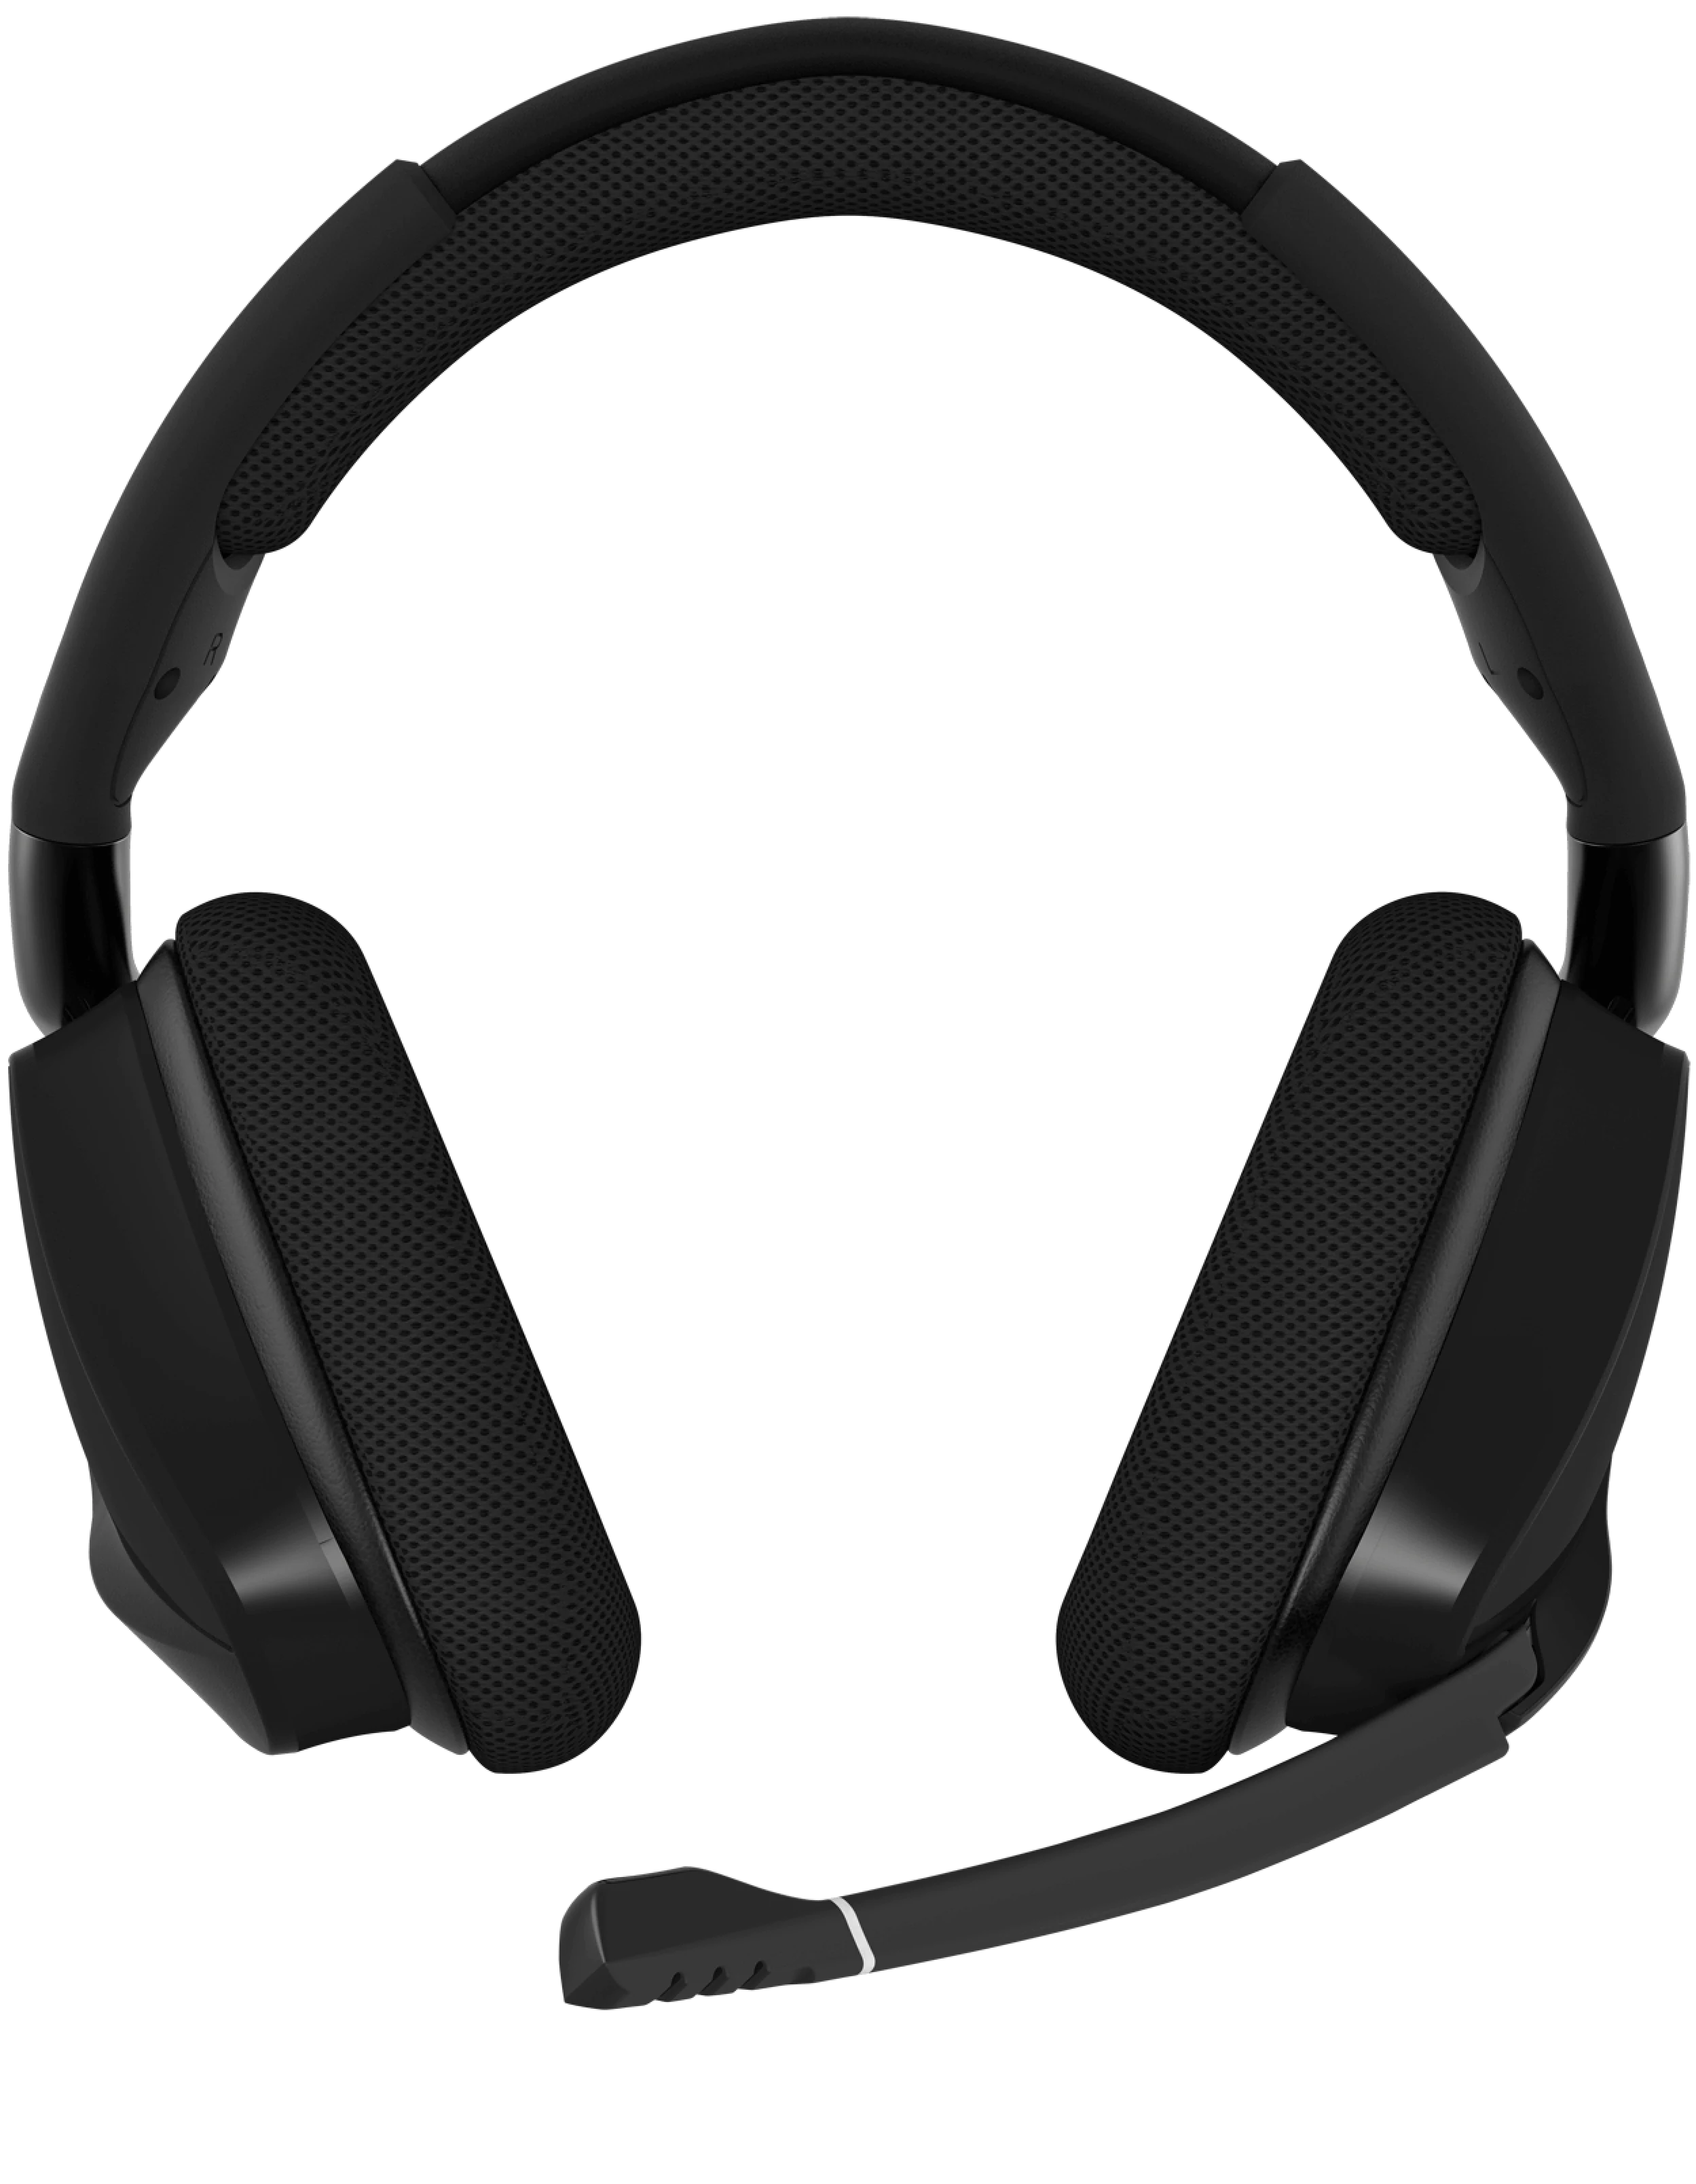 Headset Background PNG Image